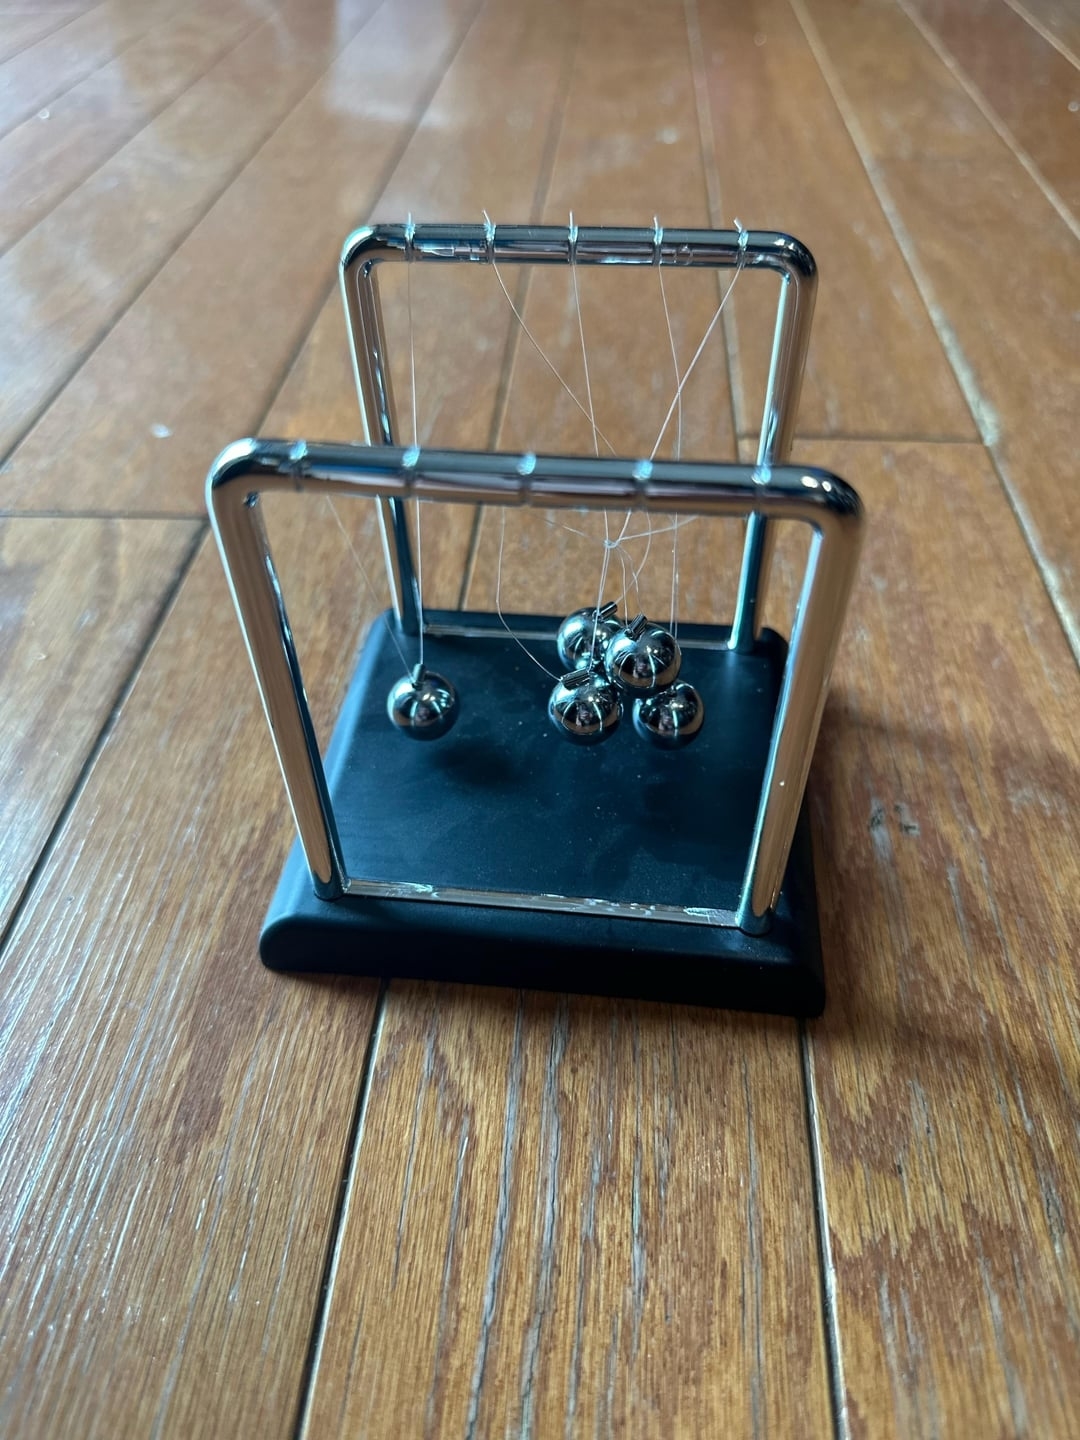 Newton&#x27;s cradle with balls in motion on a wooden floor